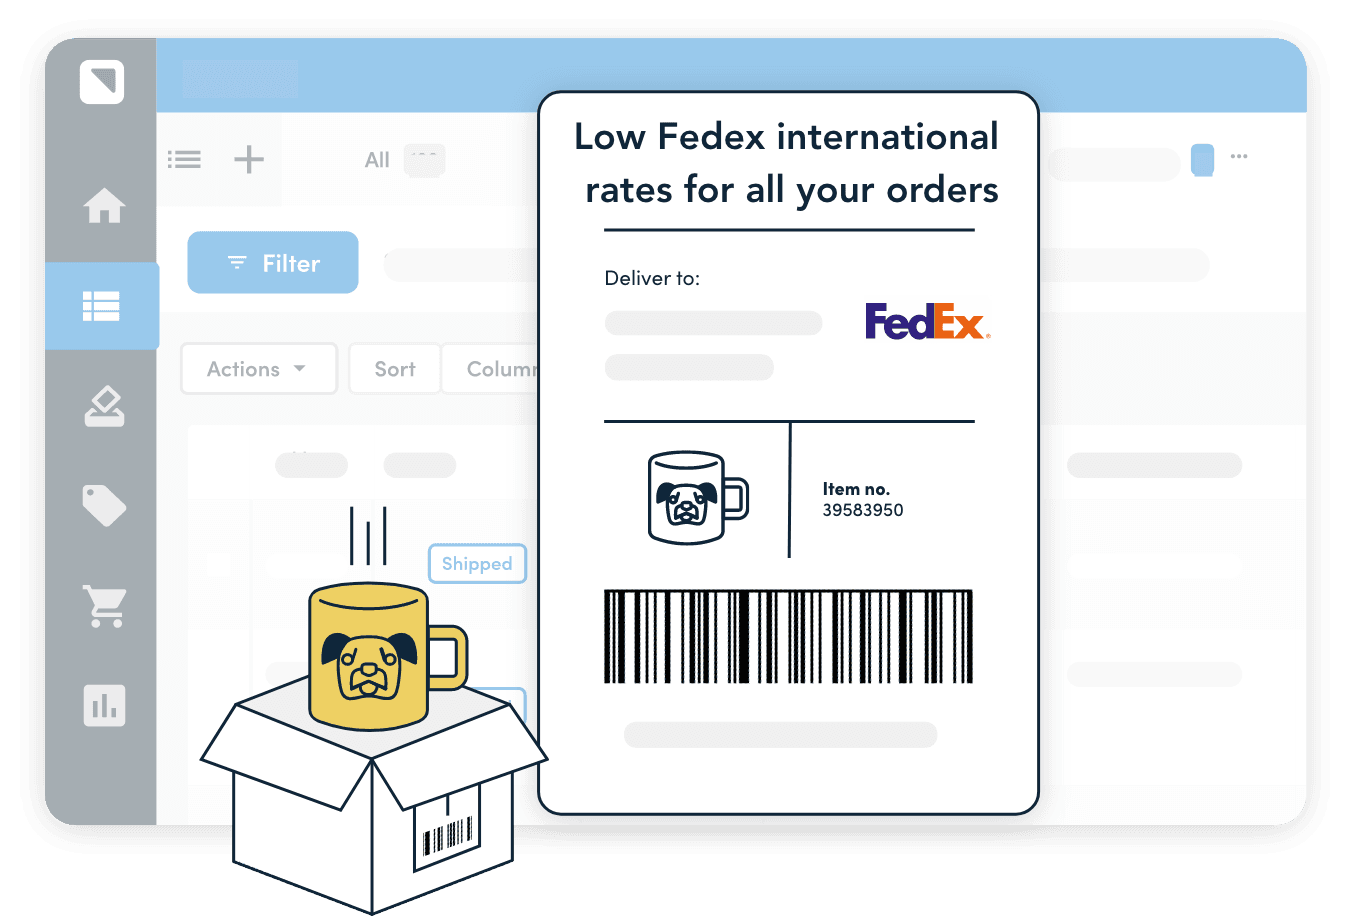  Immediate access to FedEx discounted rates 